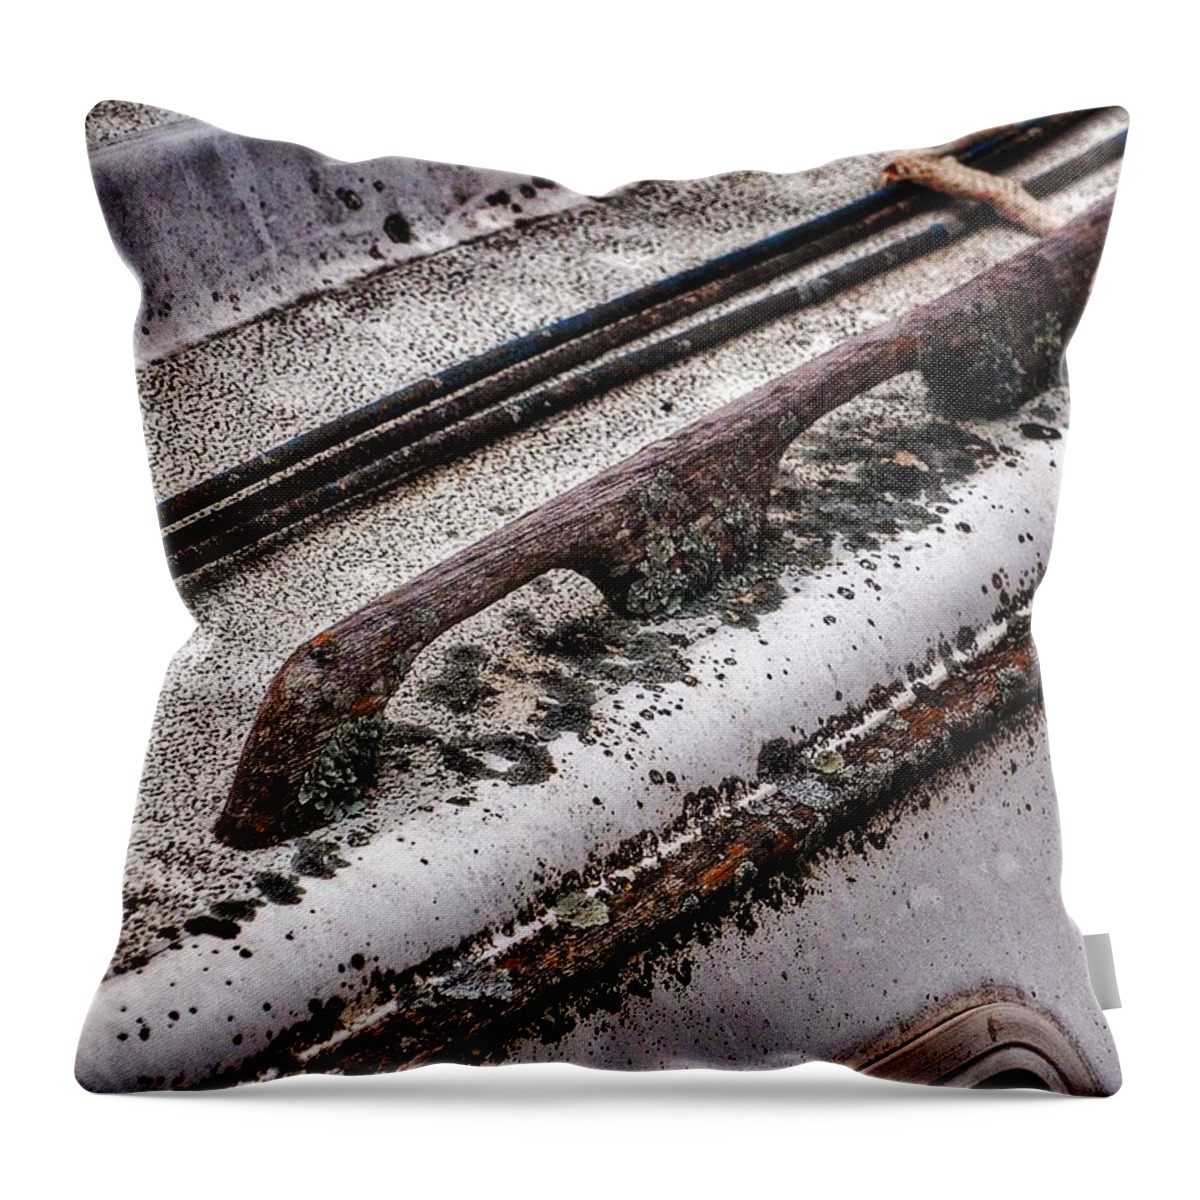 Boats Throw Pillow featuring the photograph Weathered Boat Details by Buck Buchanan